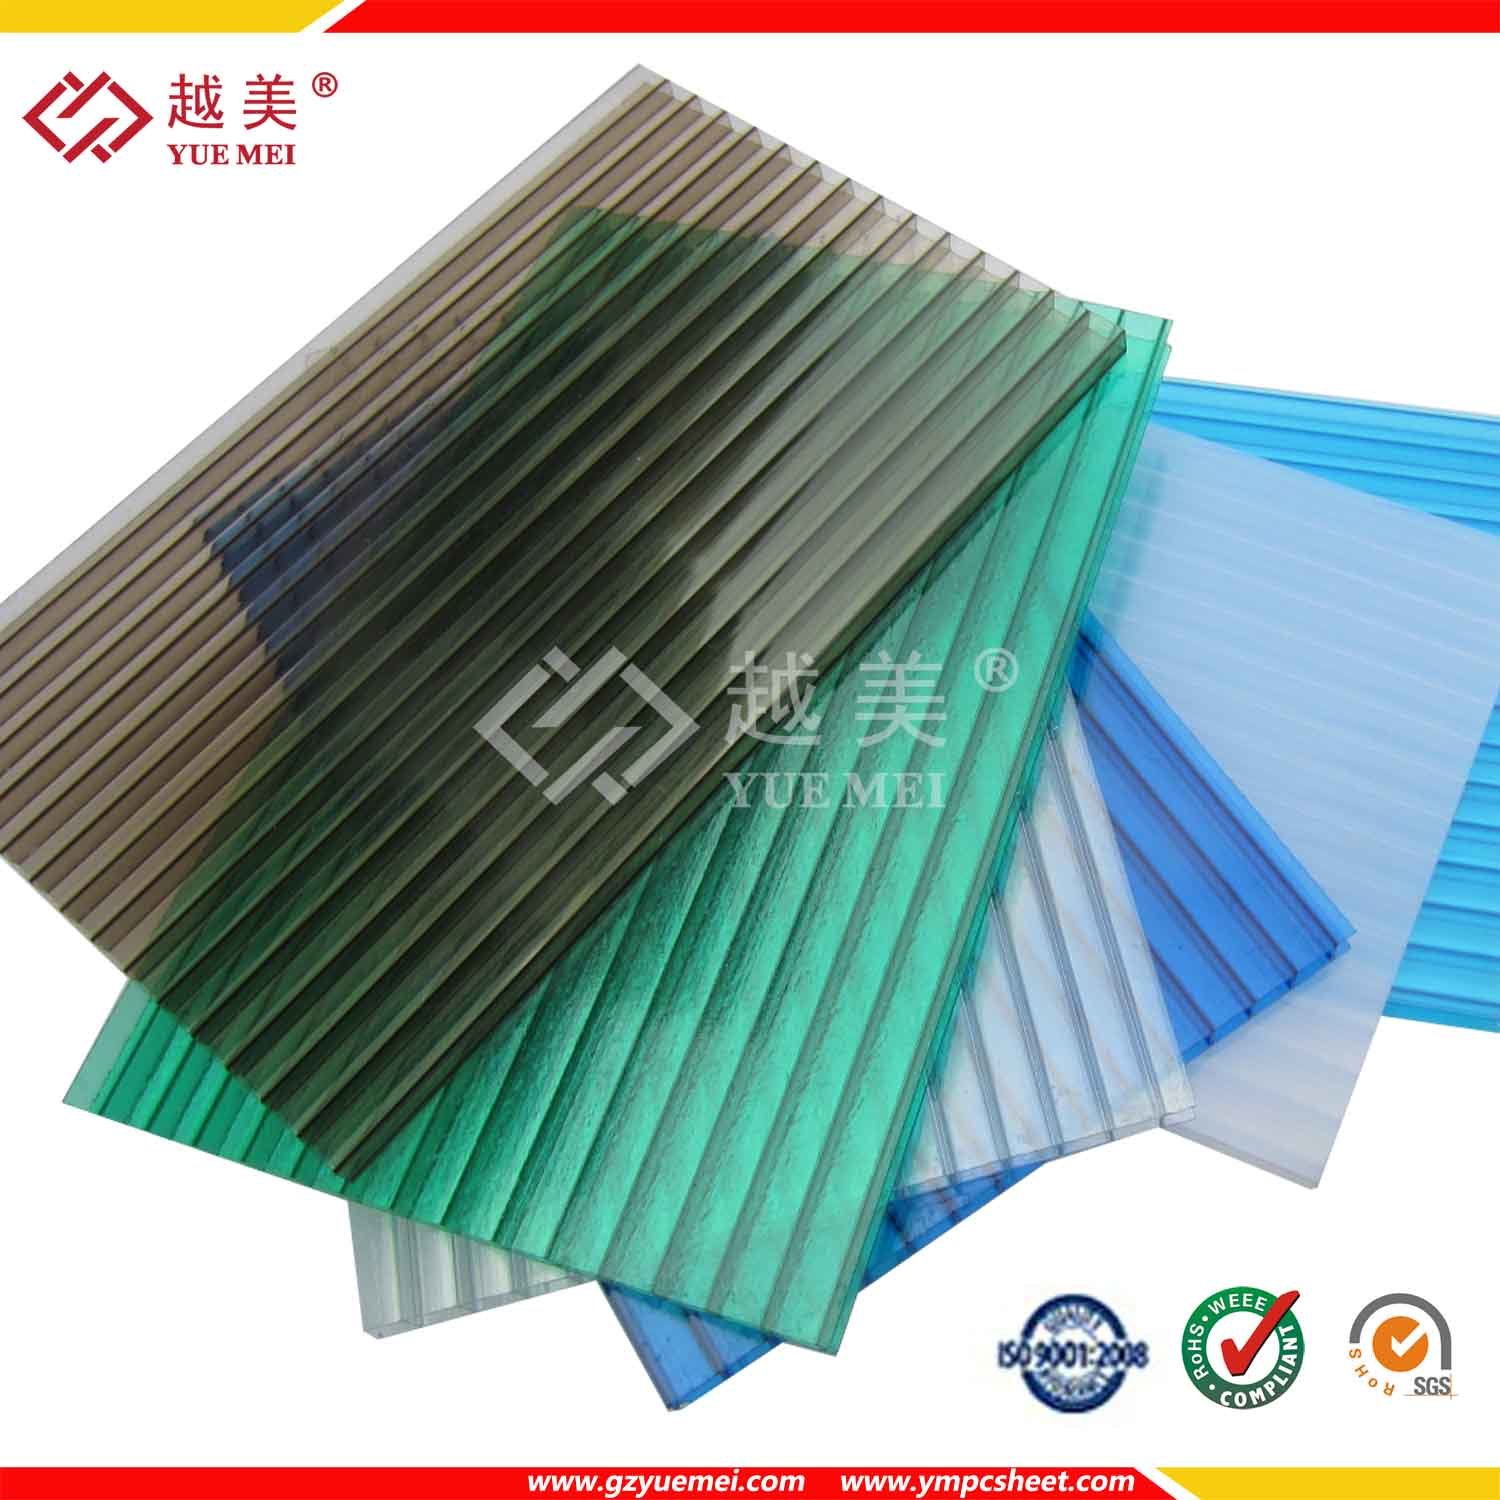 Hollow Polycarbonate Sheet Plastic Building PC Material for Roofing & Greenhouse Car Port Cannopy